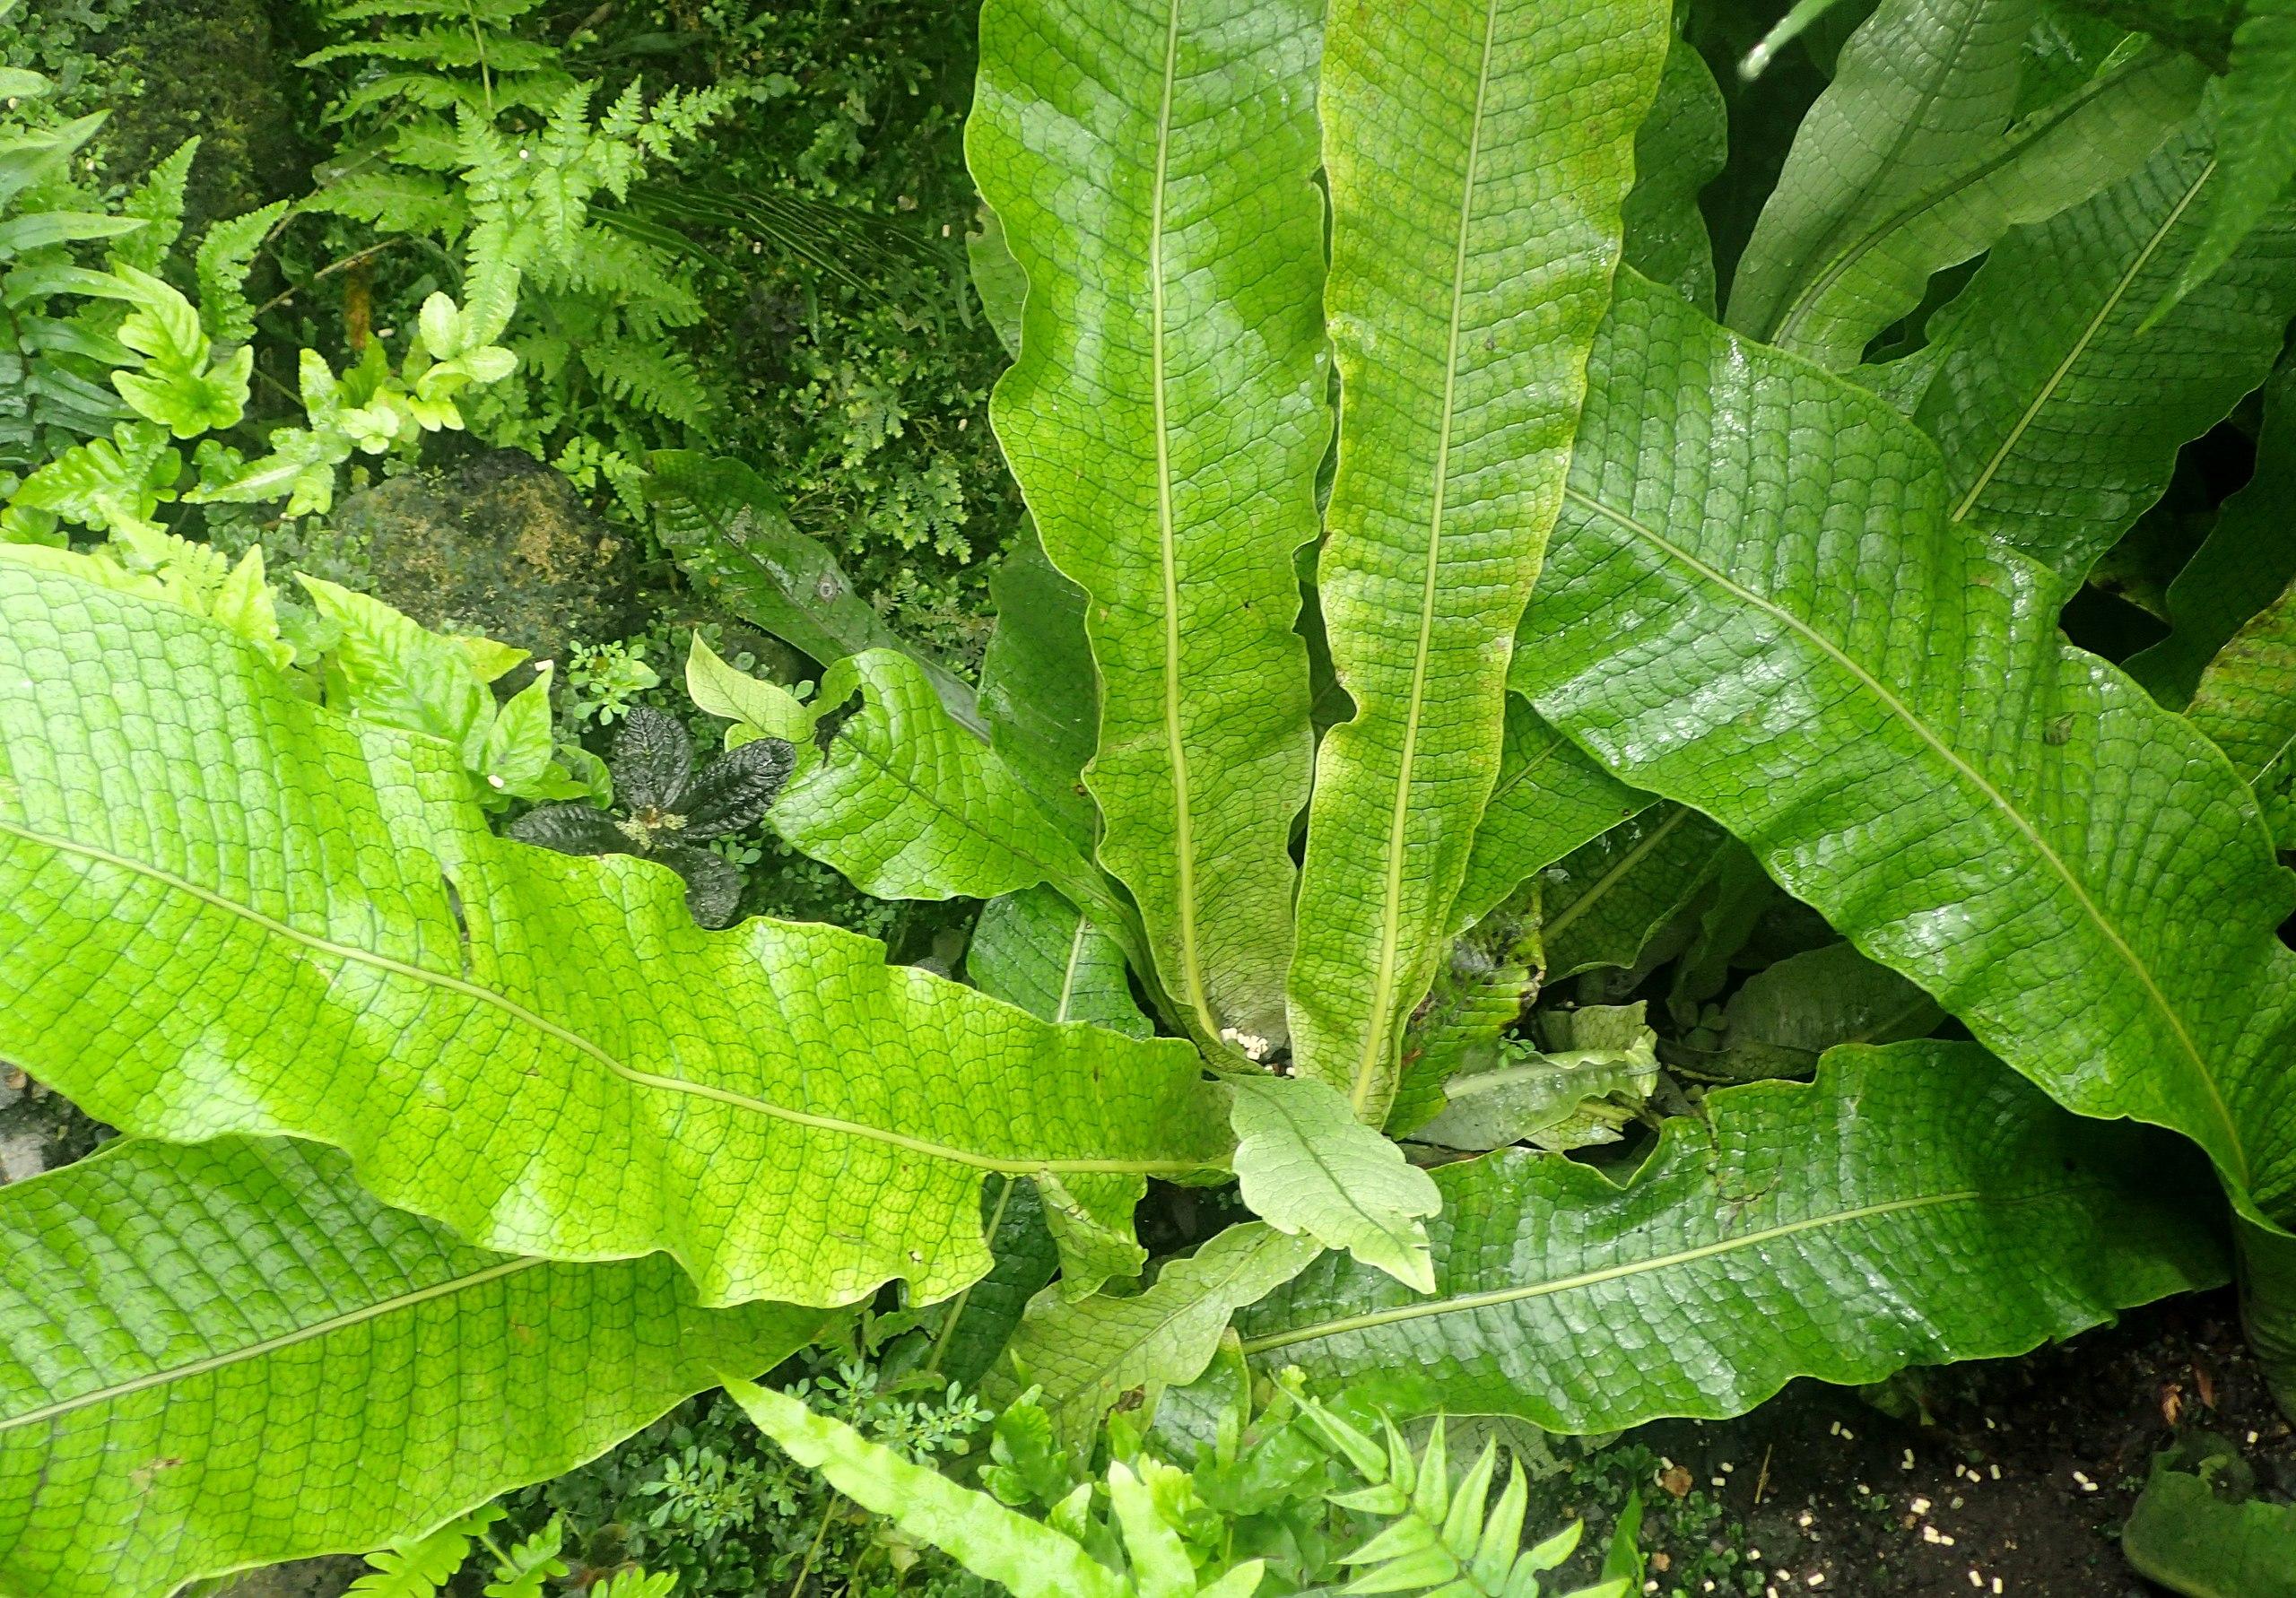 Green leaves with dark-green veins, yellow midrib and blades.